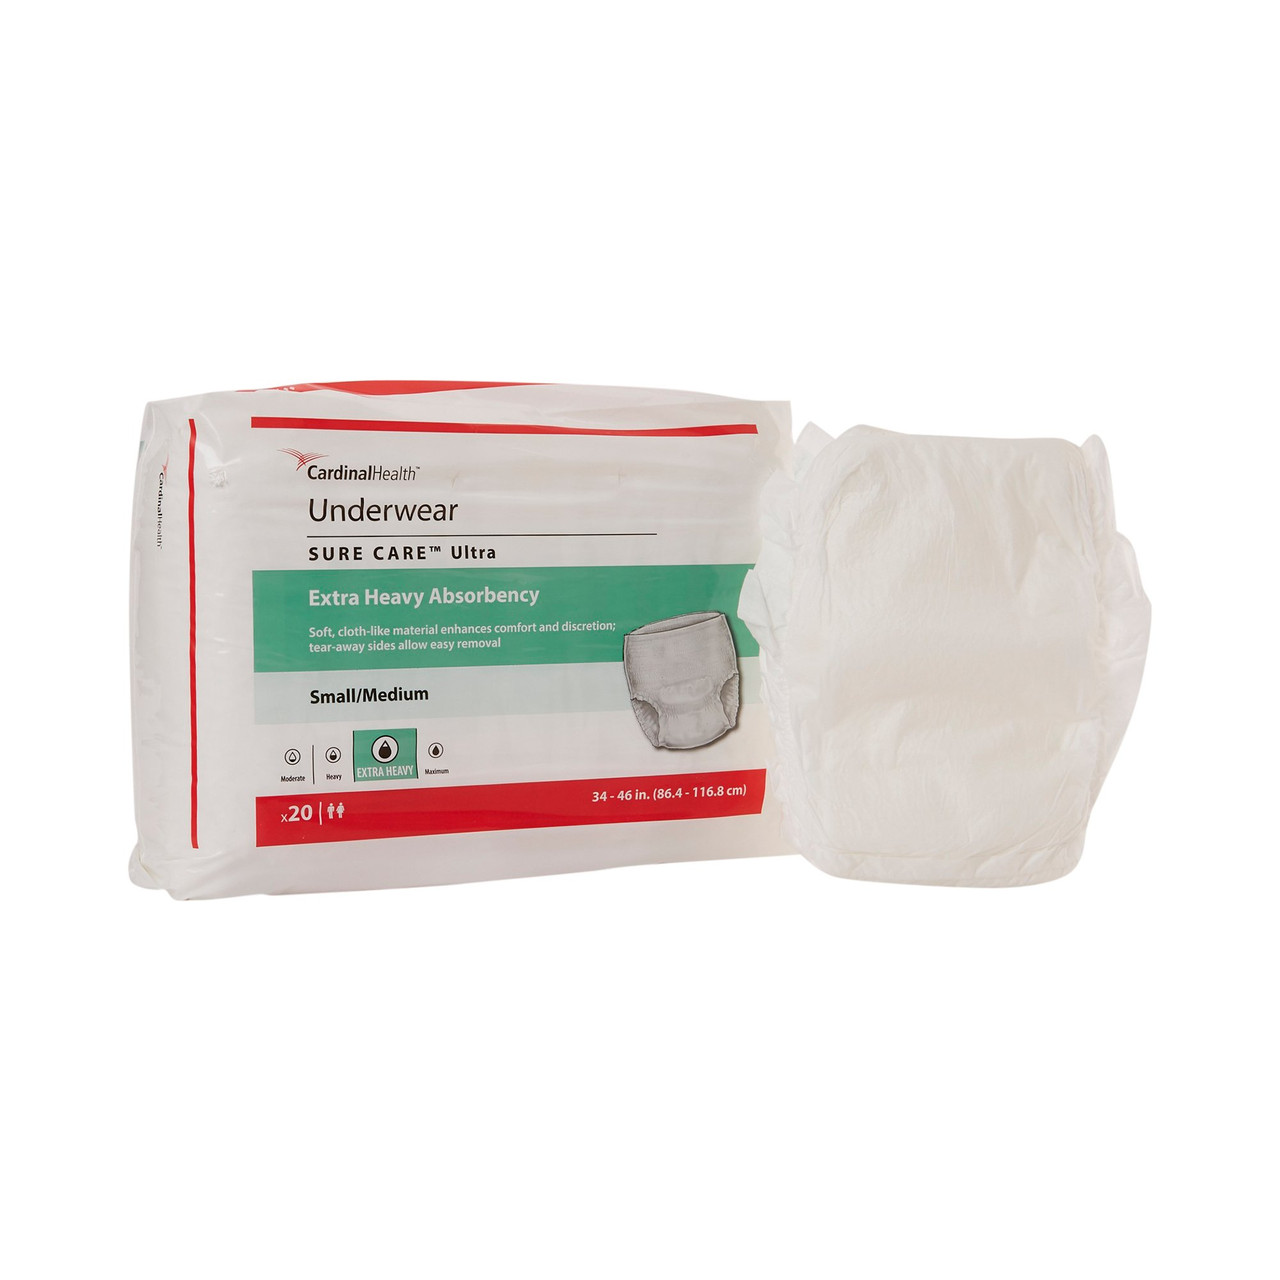 Sure Care Ultra Incontinence Underwear, Extra Heavy Absorbency